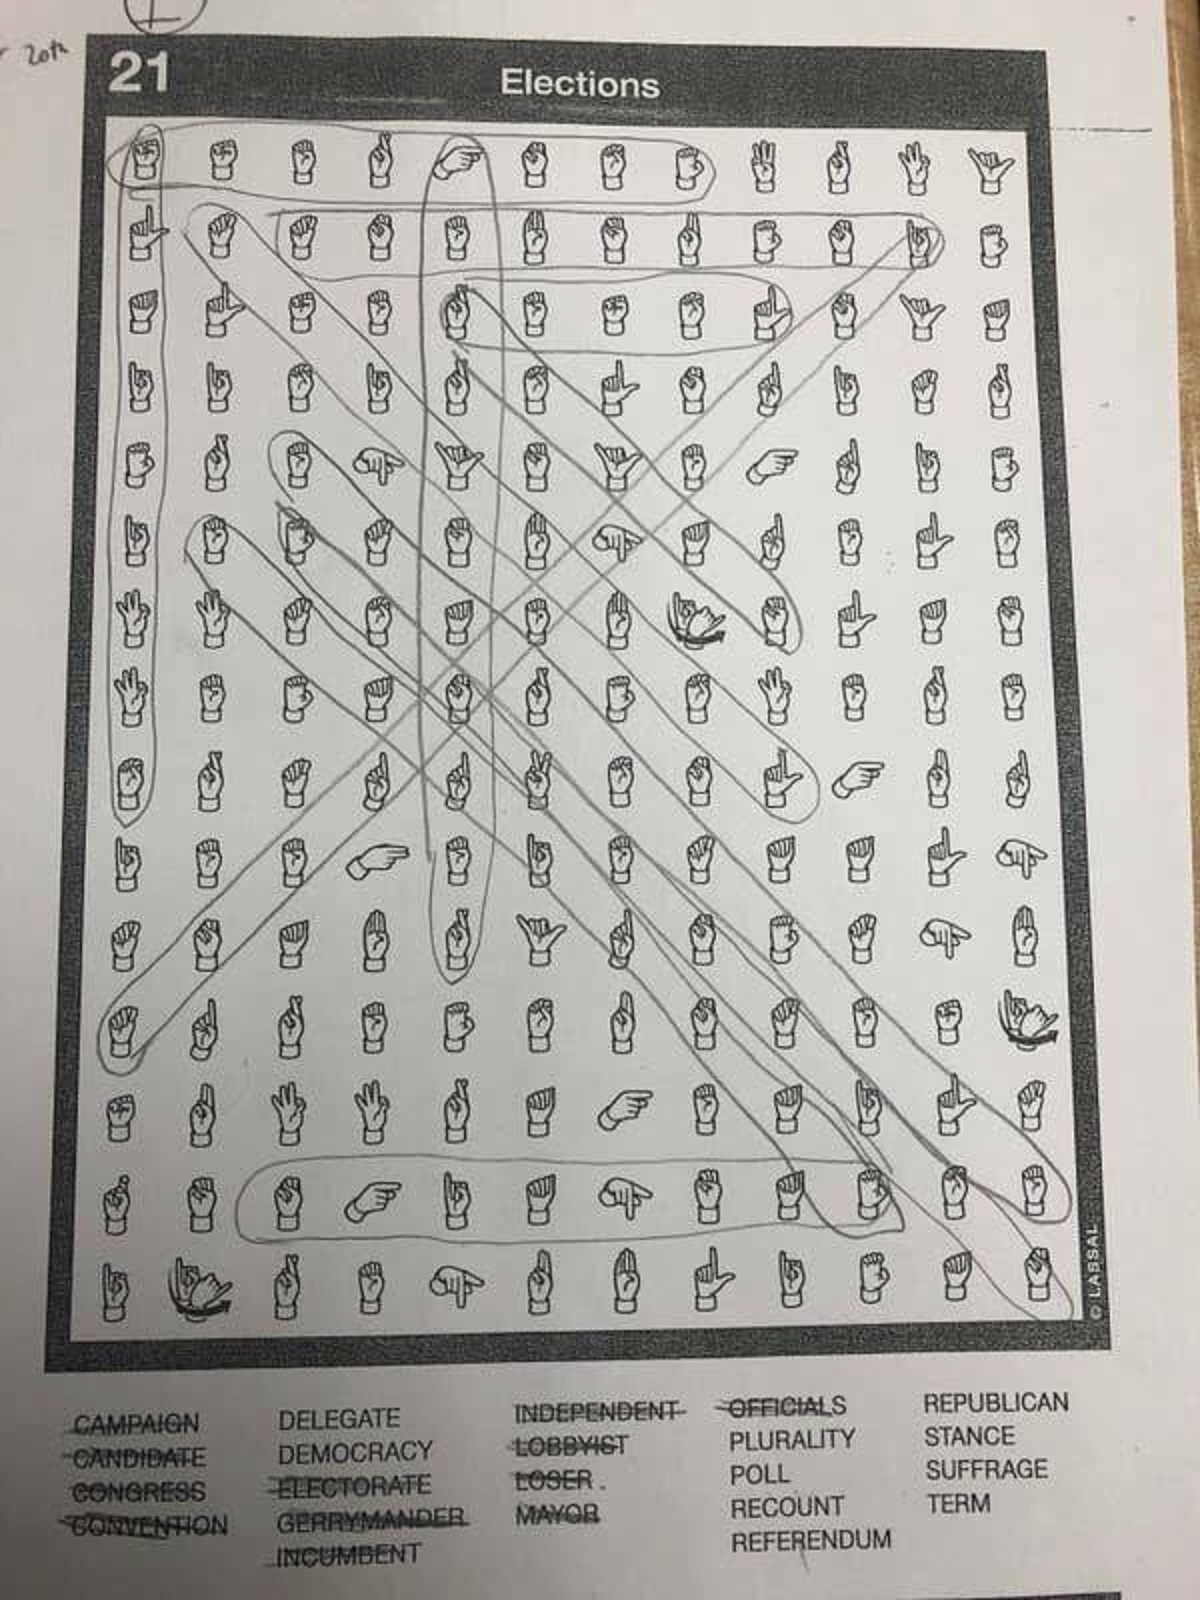 This is what an ASL word search looks like: